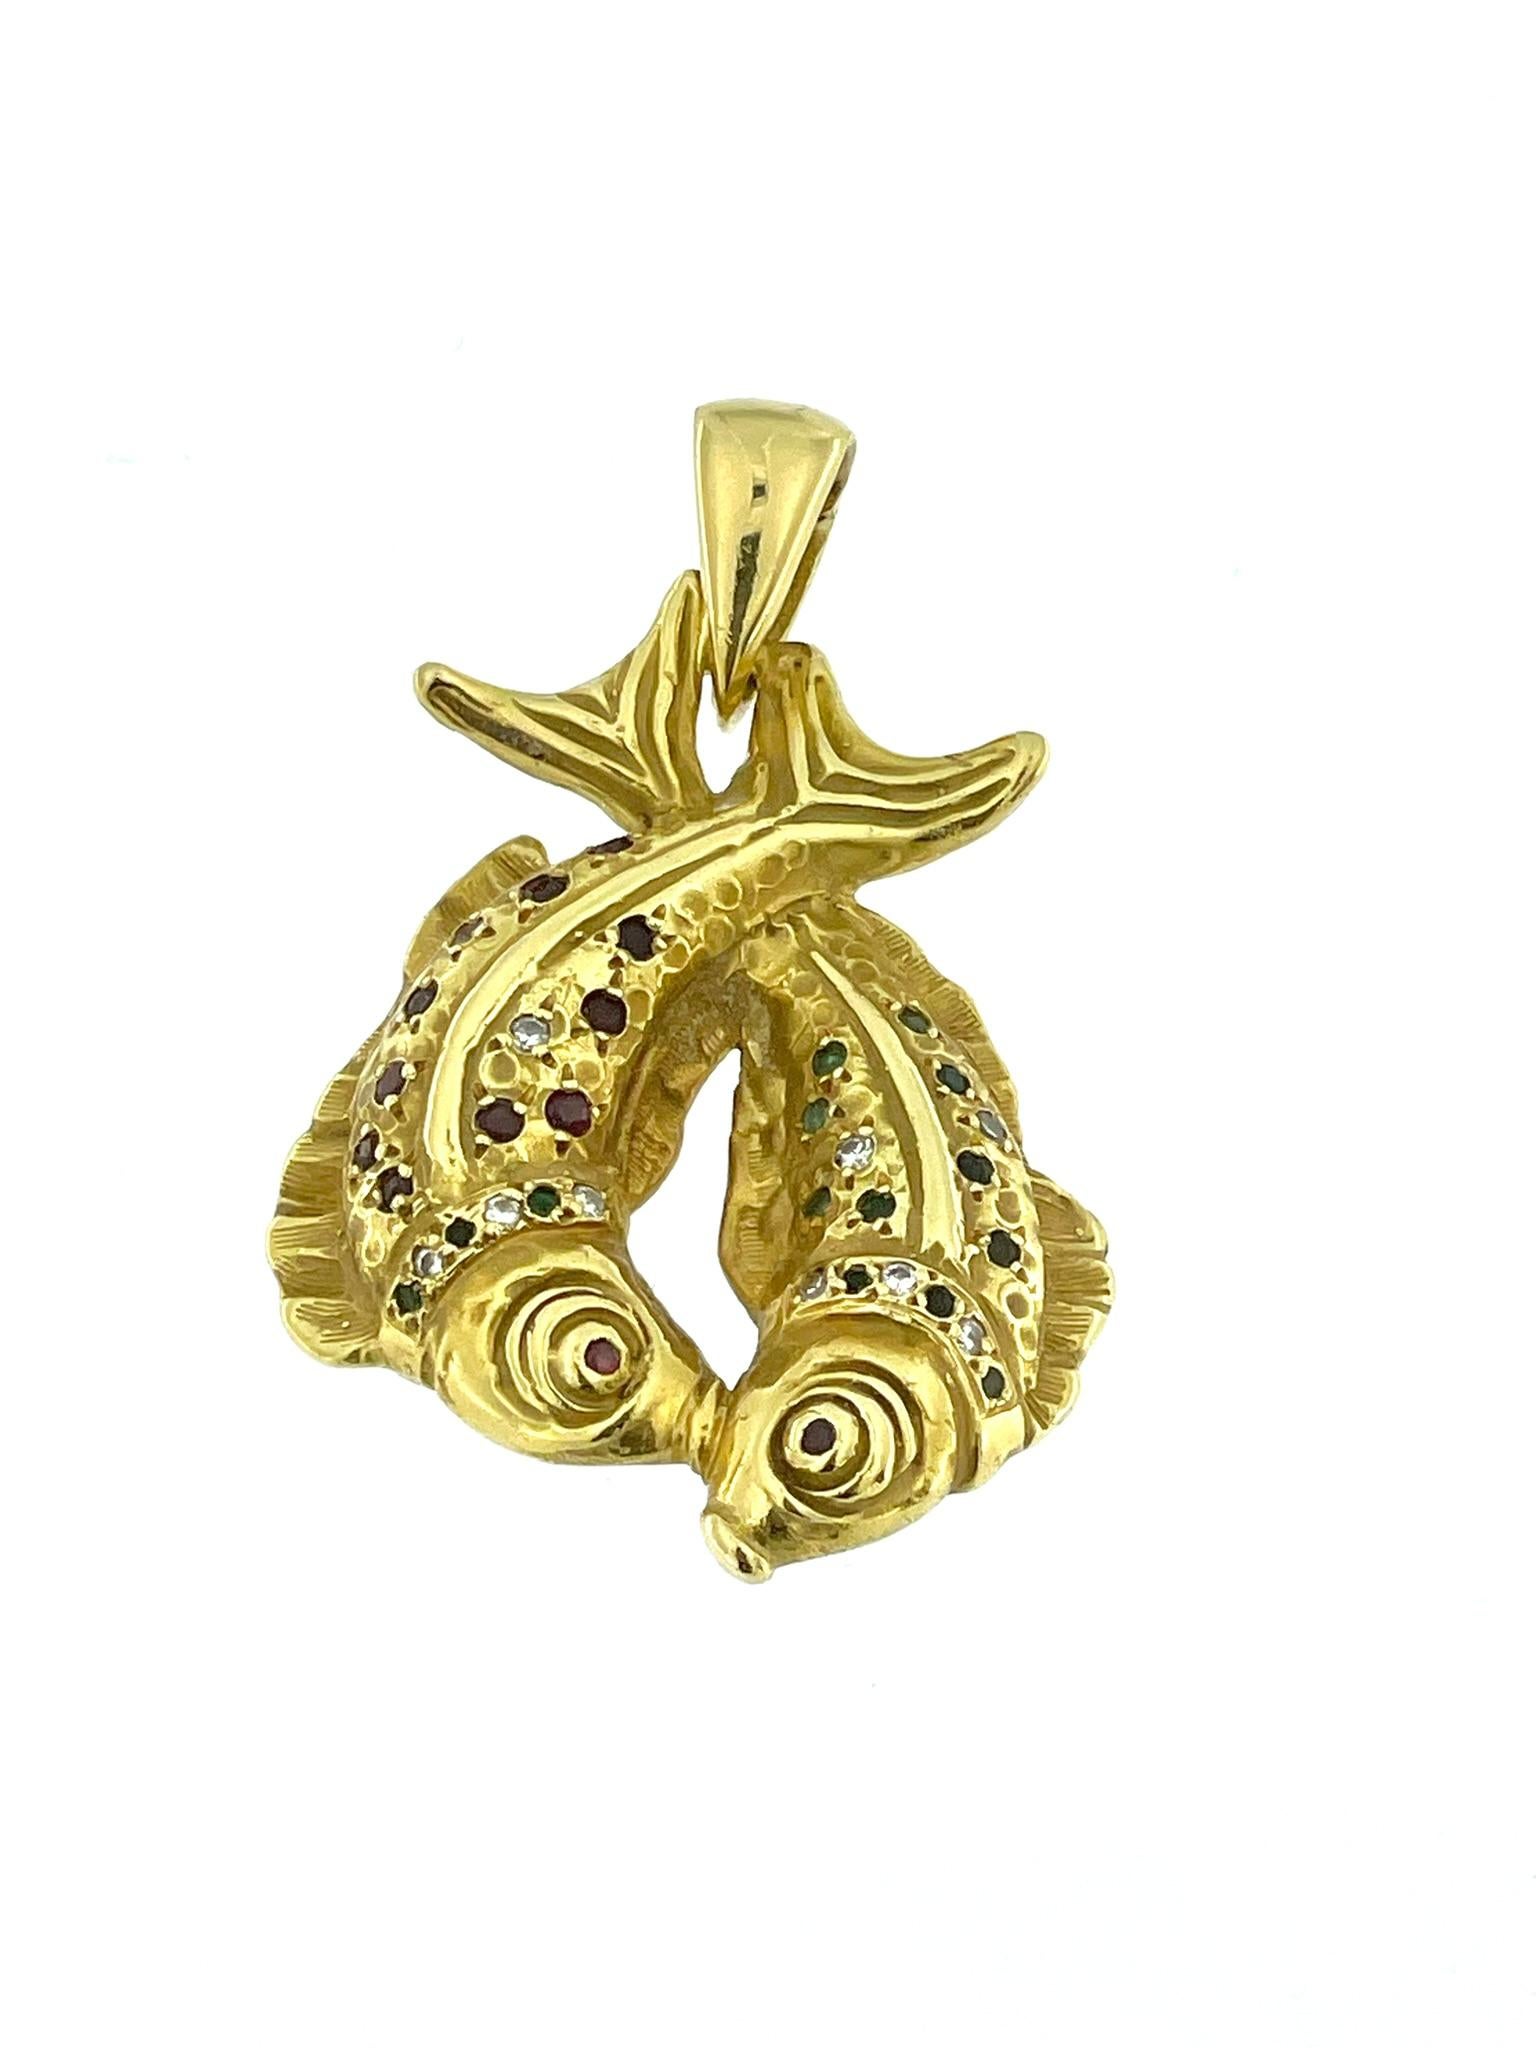 Vintage Yellow Gold Pisces Zodiac Sign Pendant with Gemstones For Sale 2